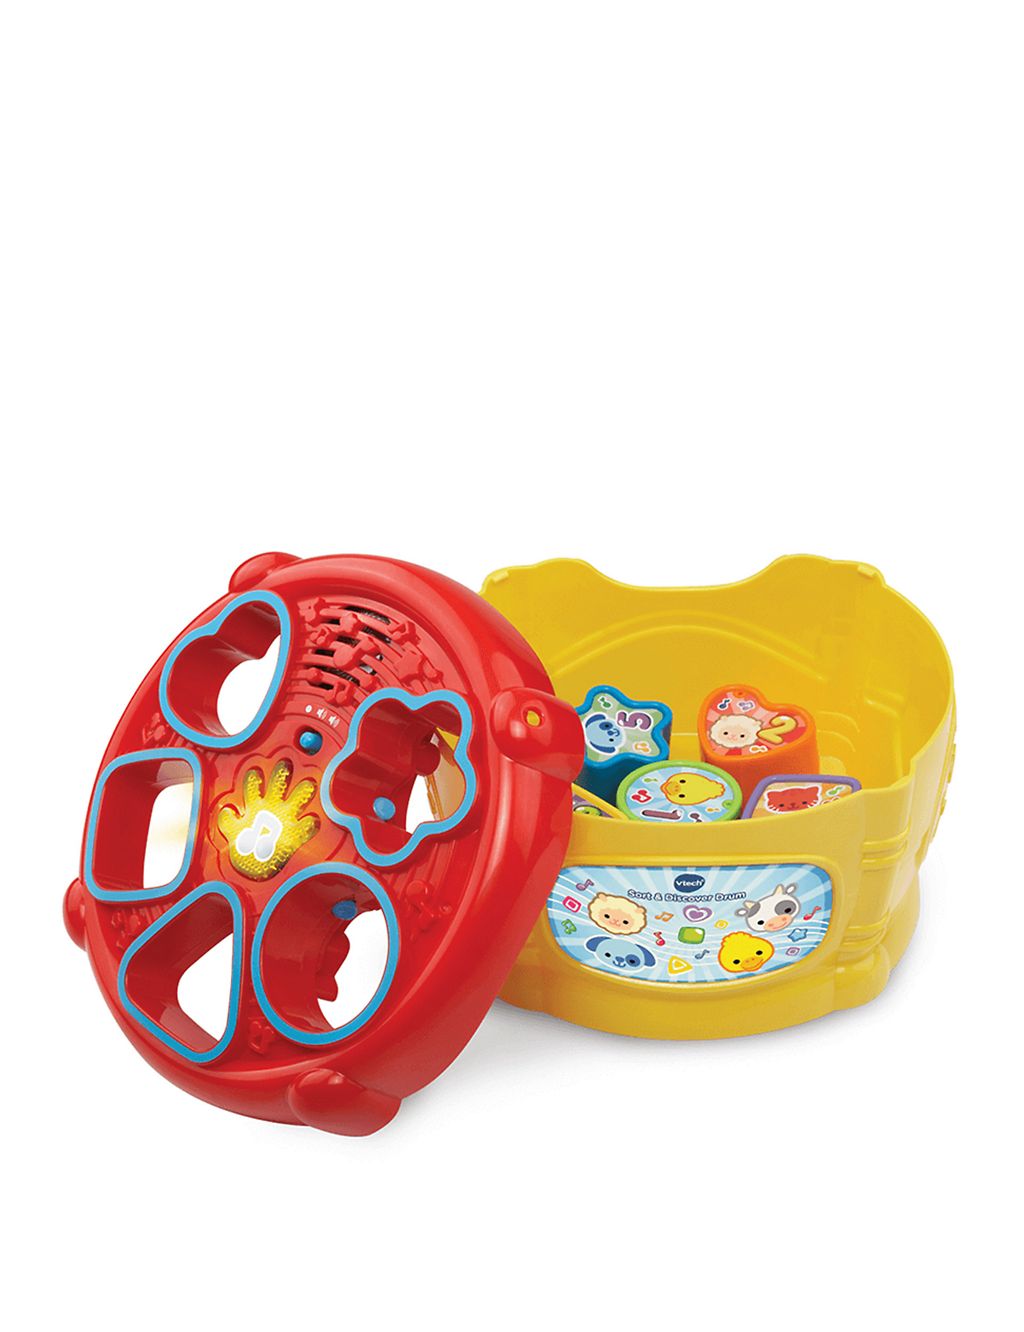 Sort & Discover Interactive Drum (1-3 Yrs) 1 of 5